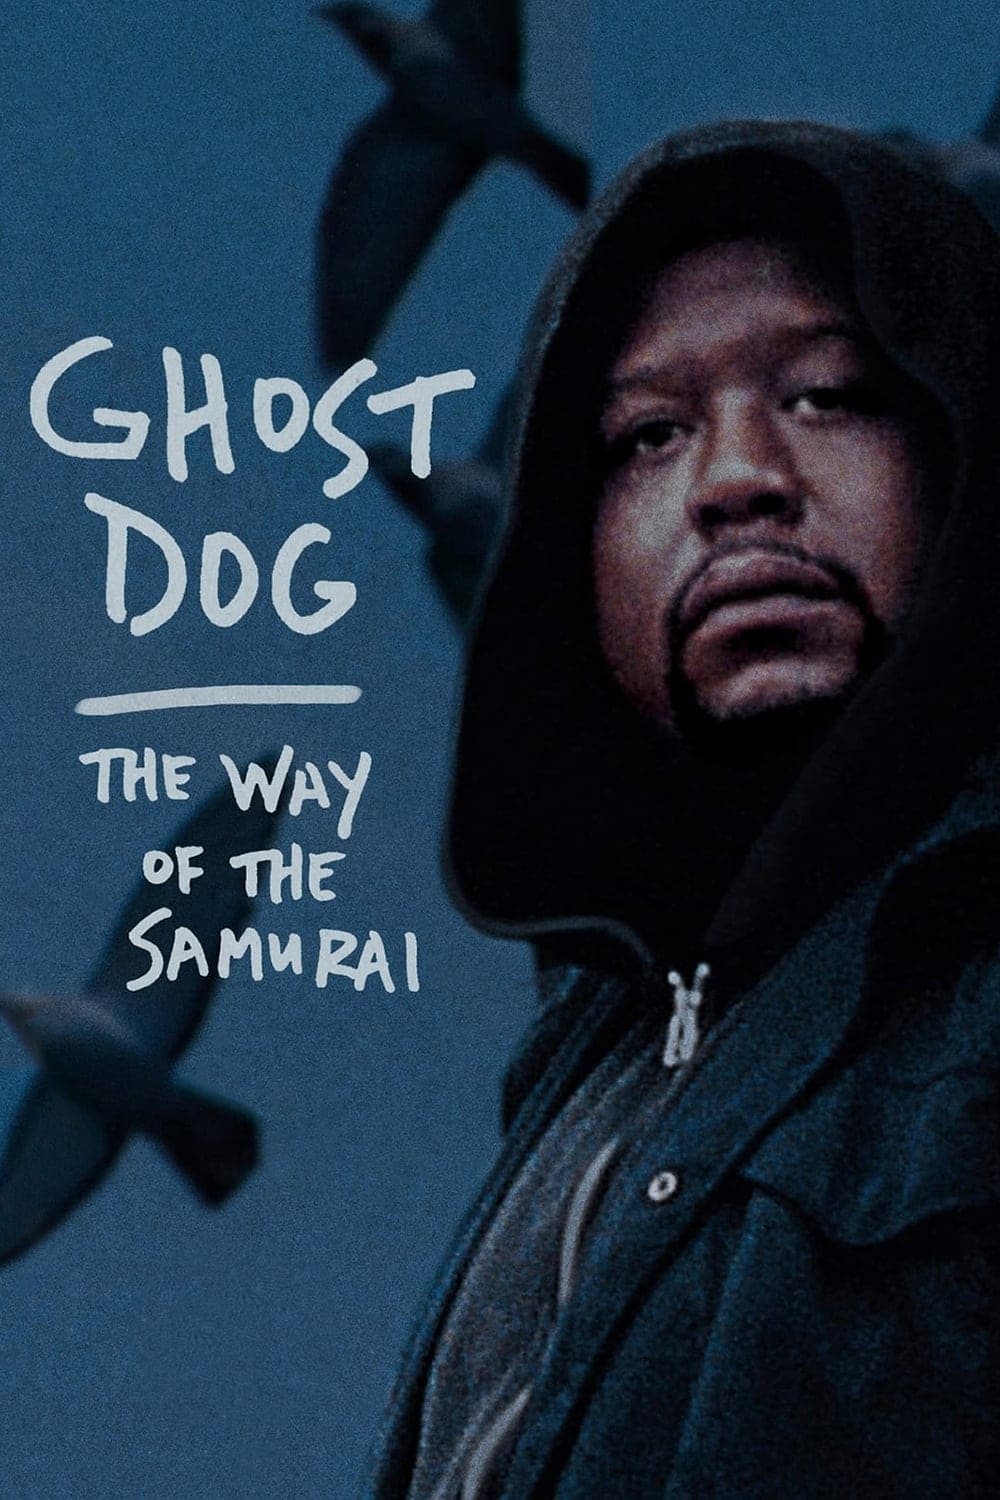 Affiche du film Ghost Dog: The Way of the Samurai poster